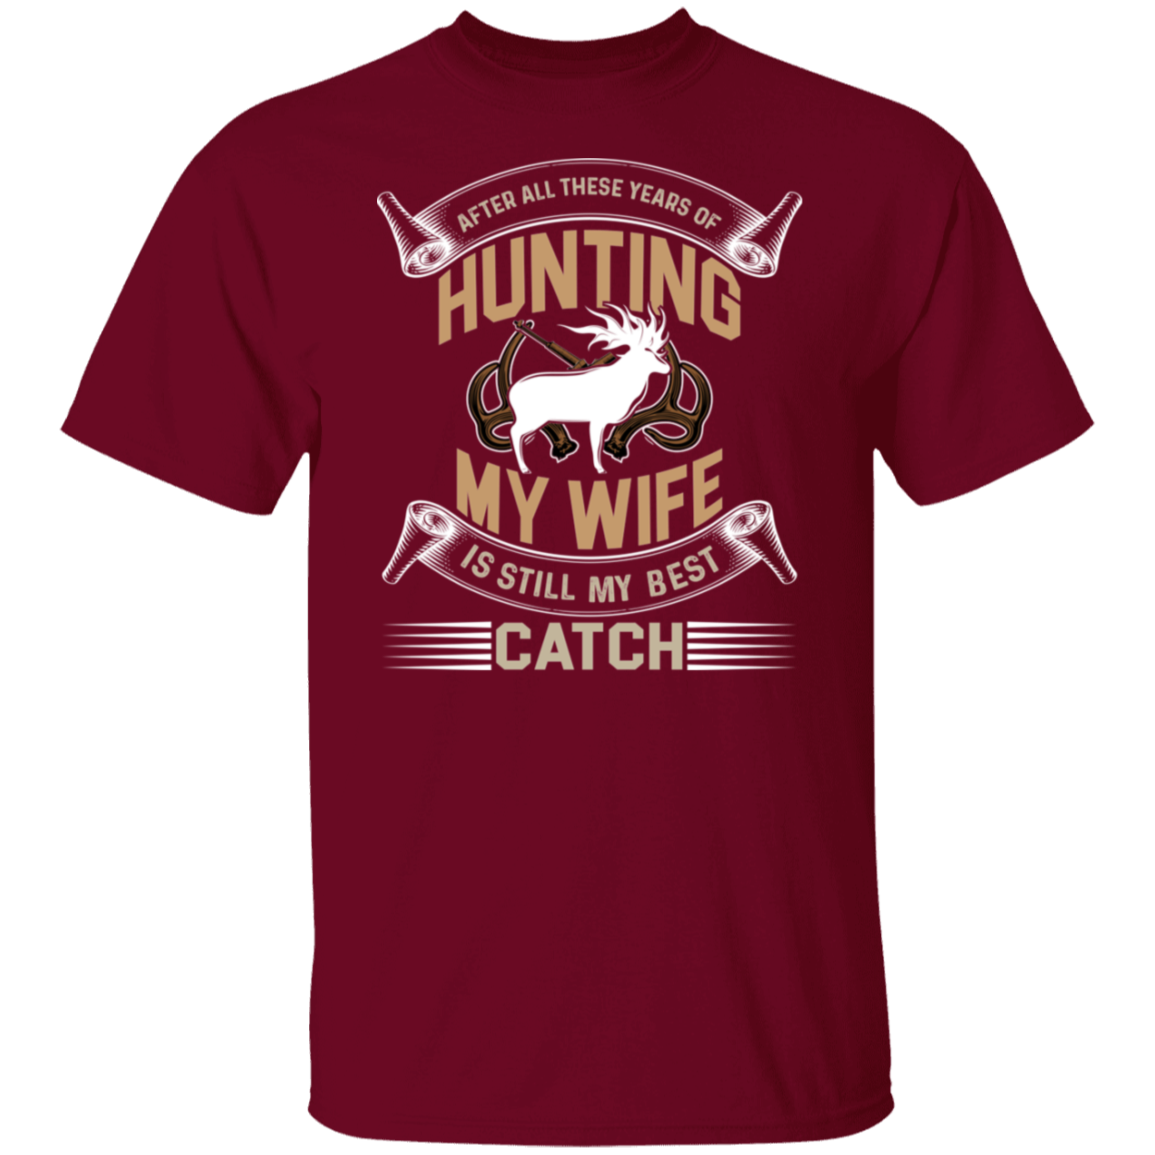 After All These Years Hunting T-Shirt